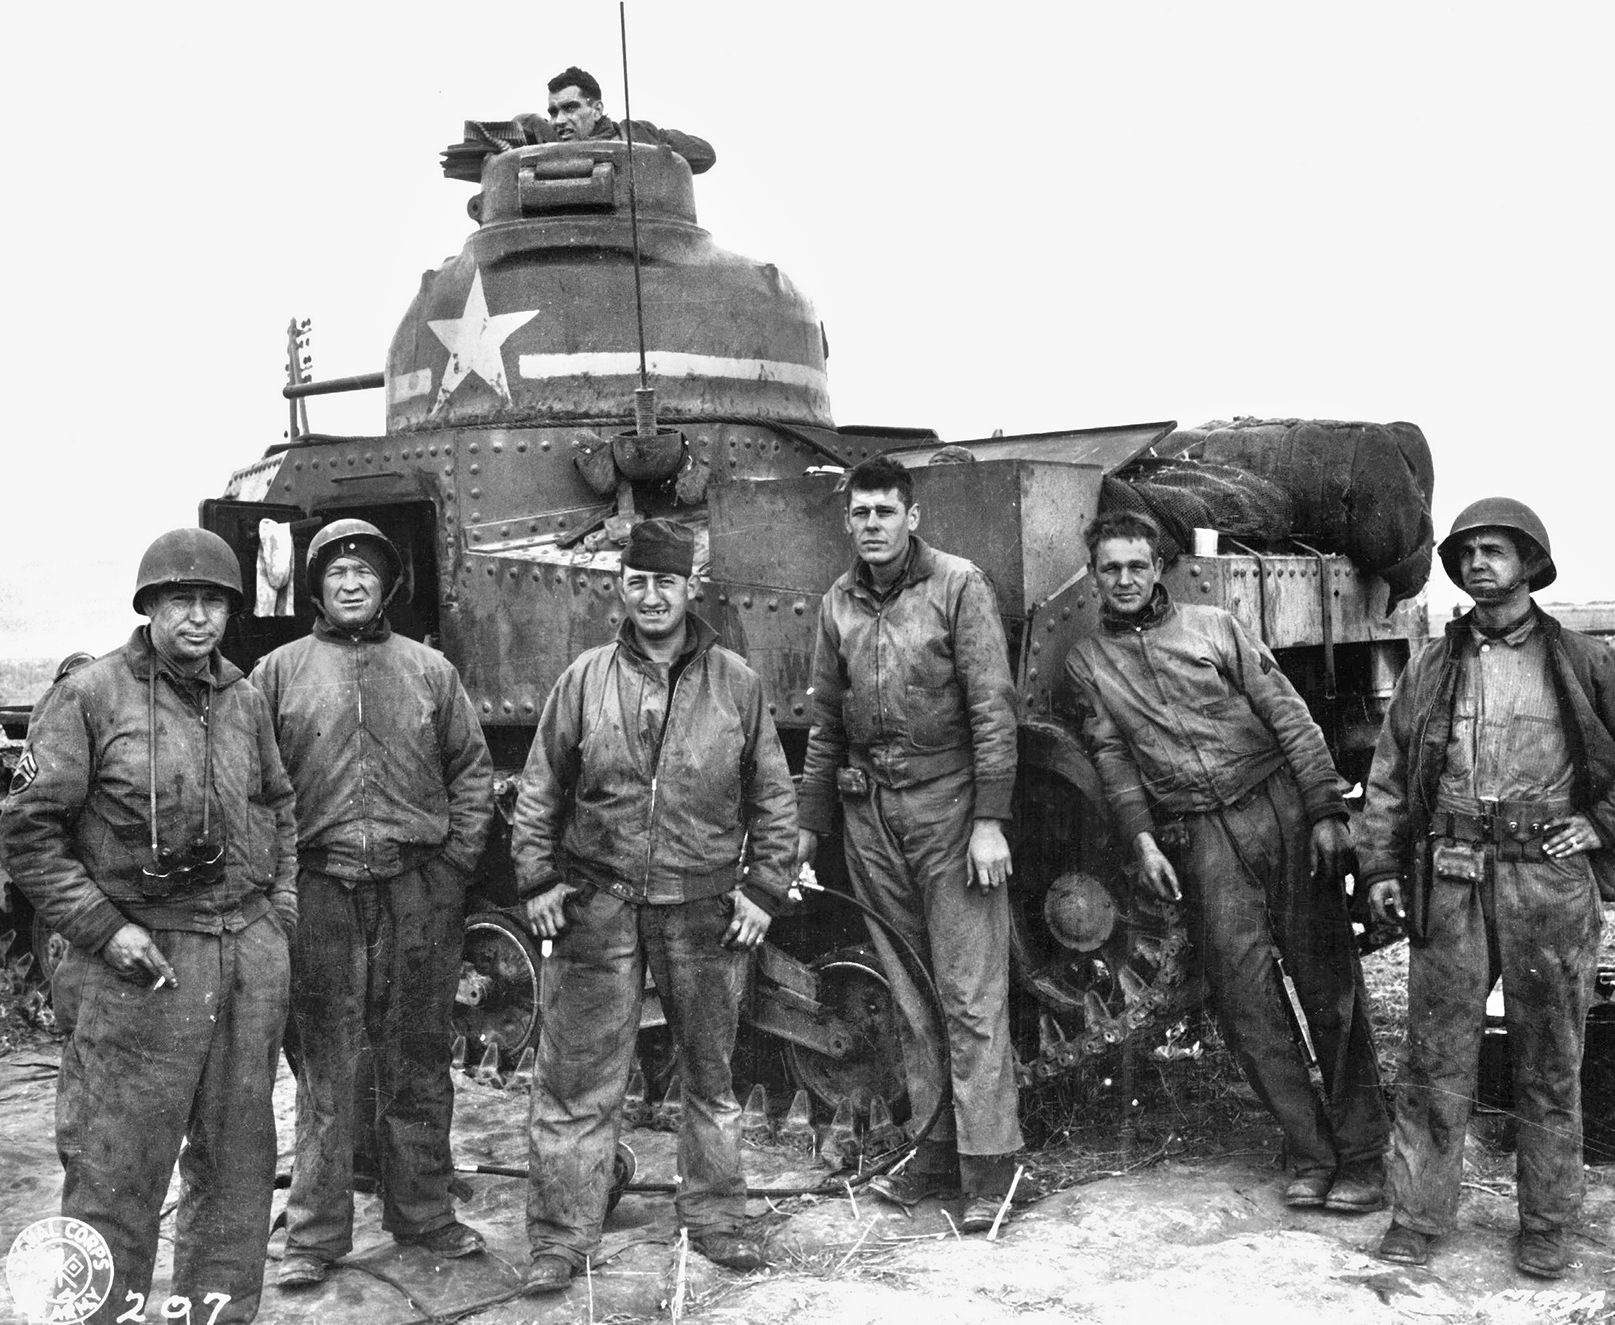 An American tank crew poses beside its M3 tank during a respite from combat in Tunisia in November 1942. The Grant tank was soon replaced by the M4 Sherman medium tank.